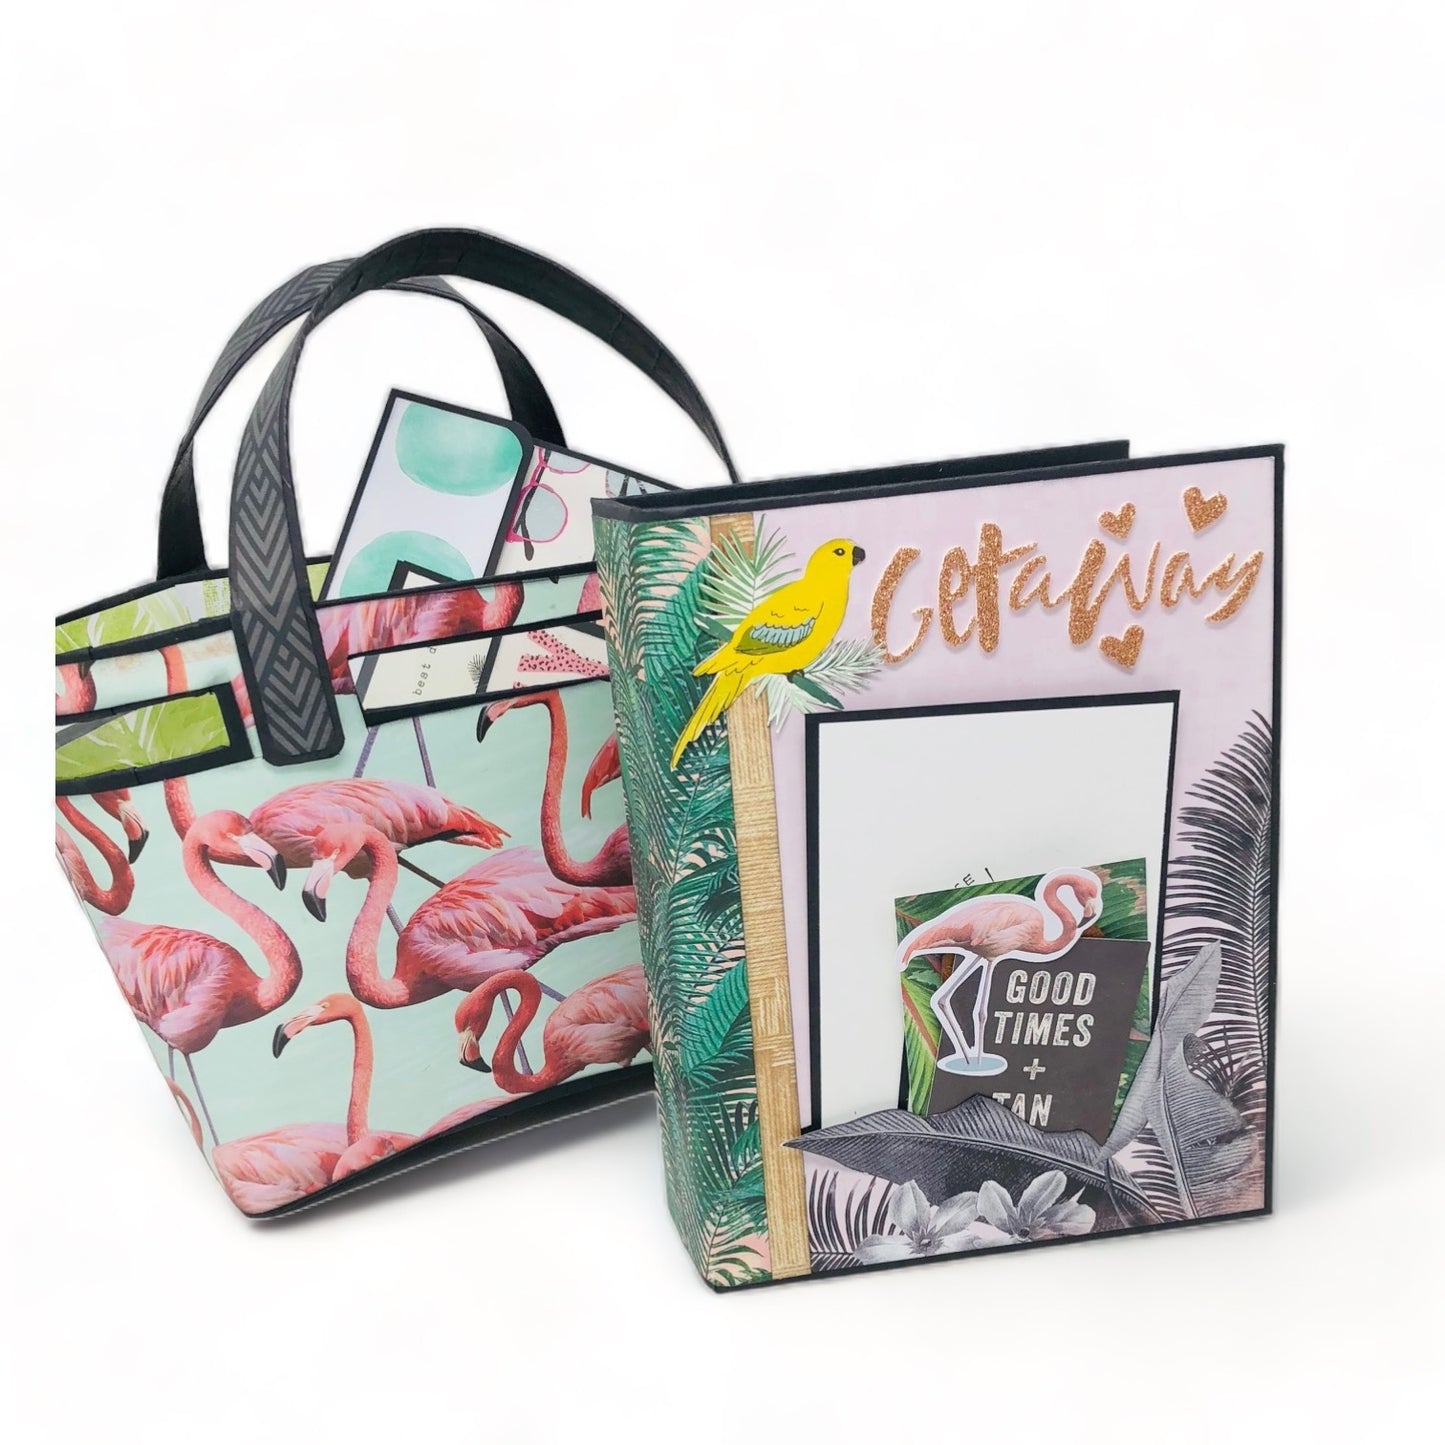 Totally Awesome Tote & Album